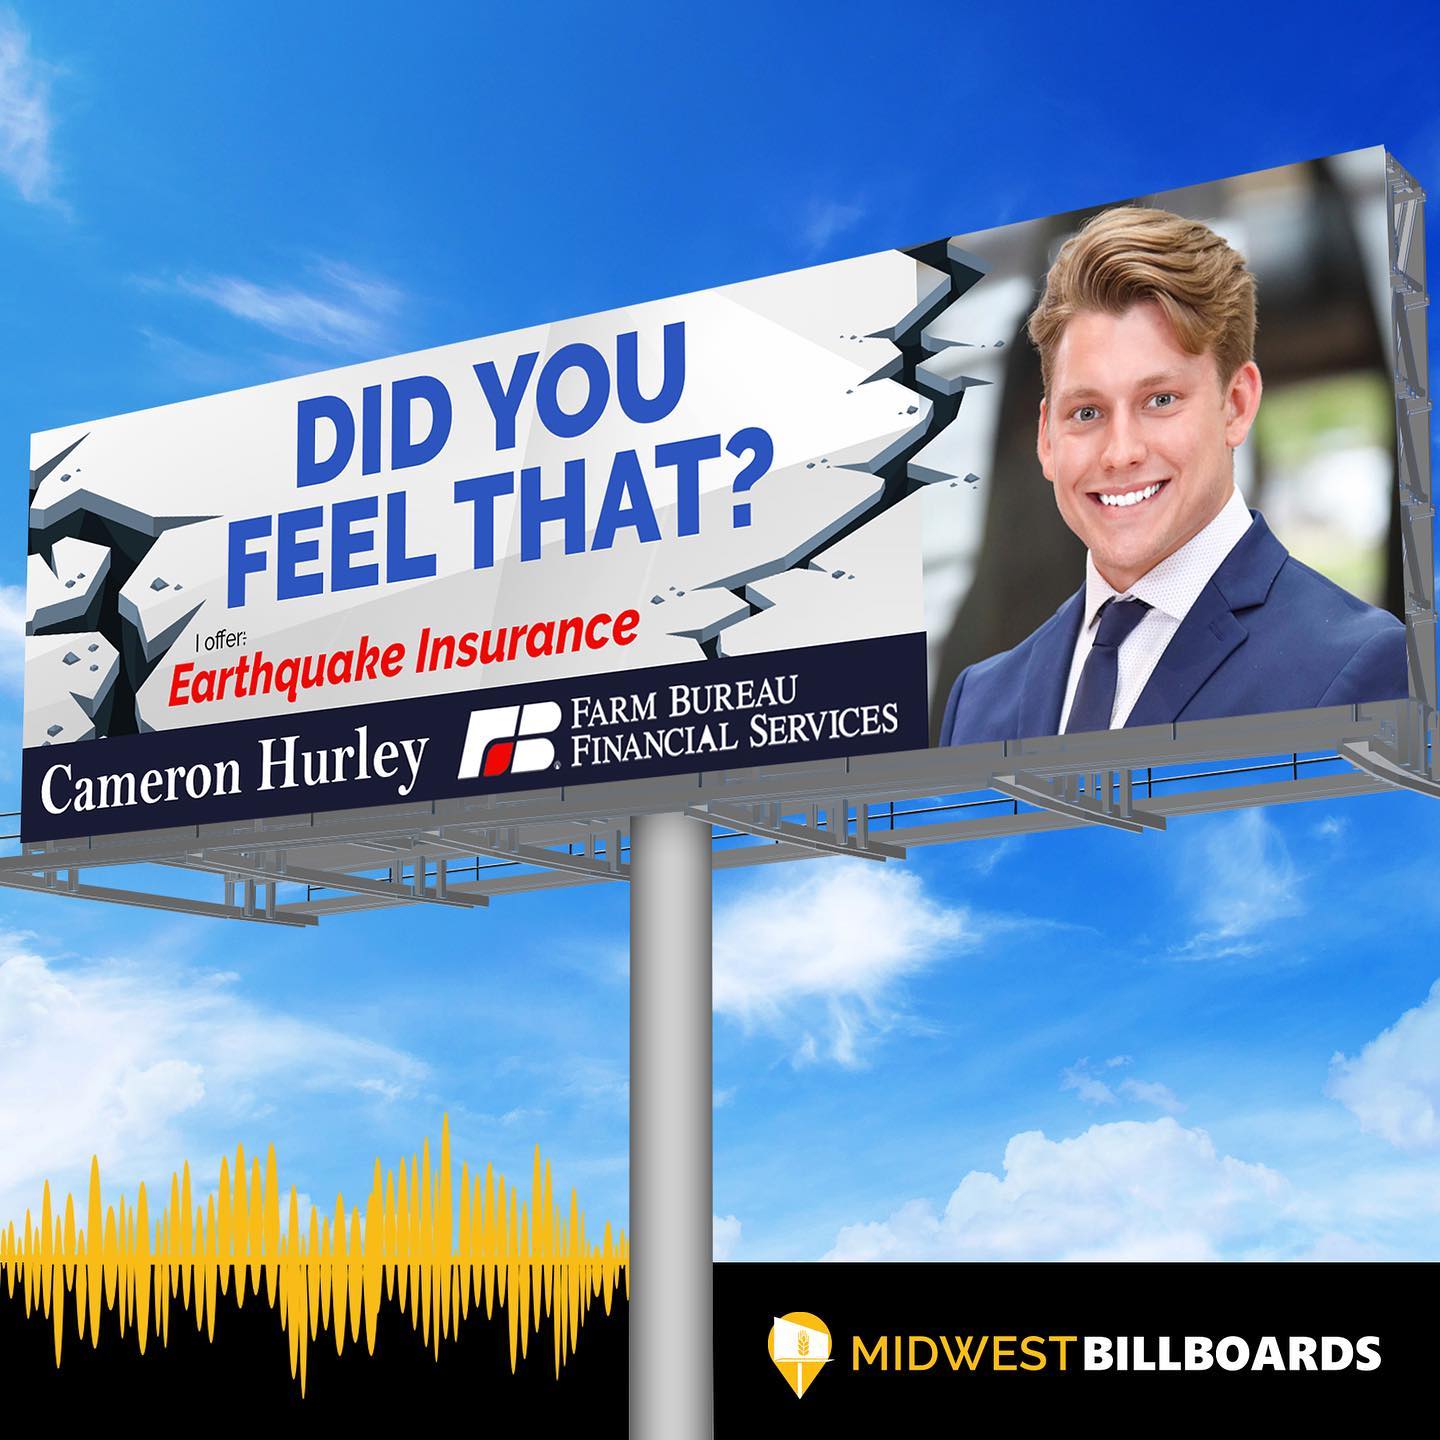 Insurance Archives - Midwest Billboards Inc.